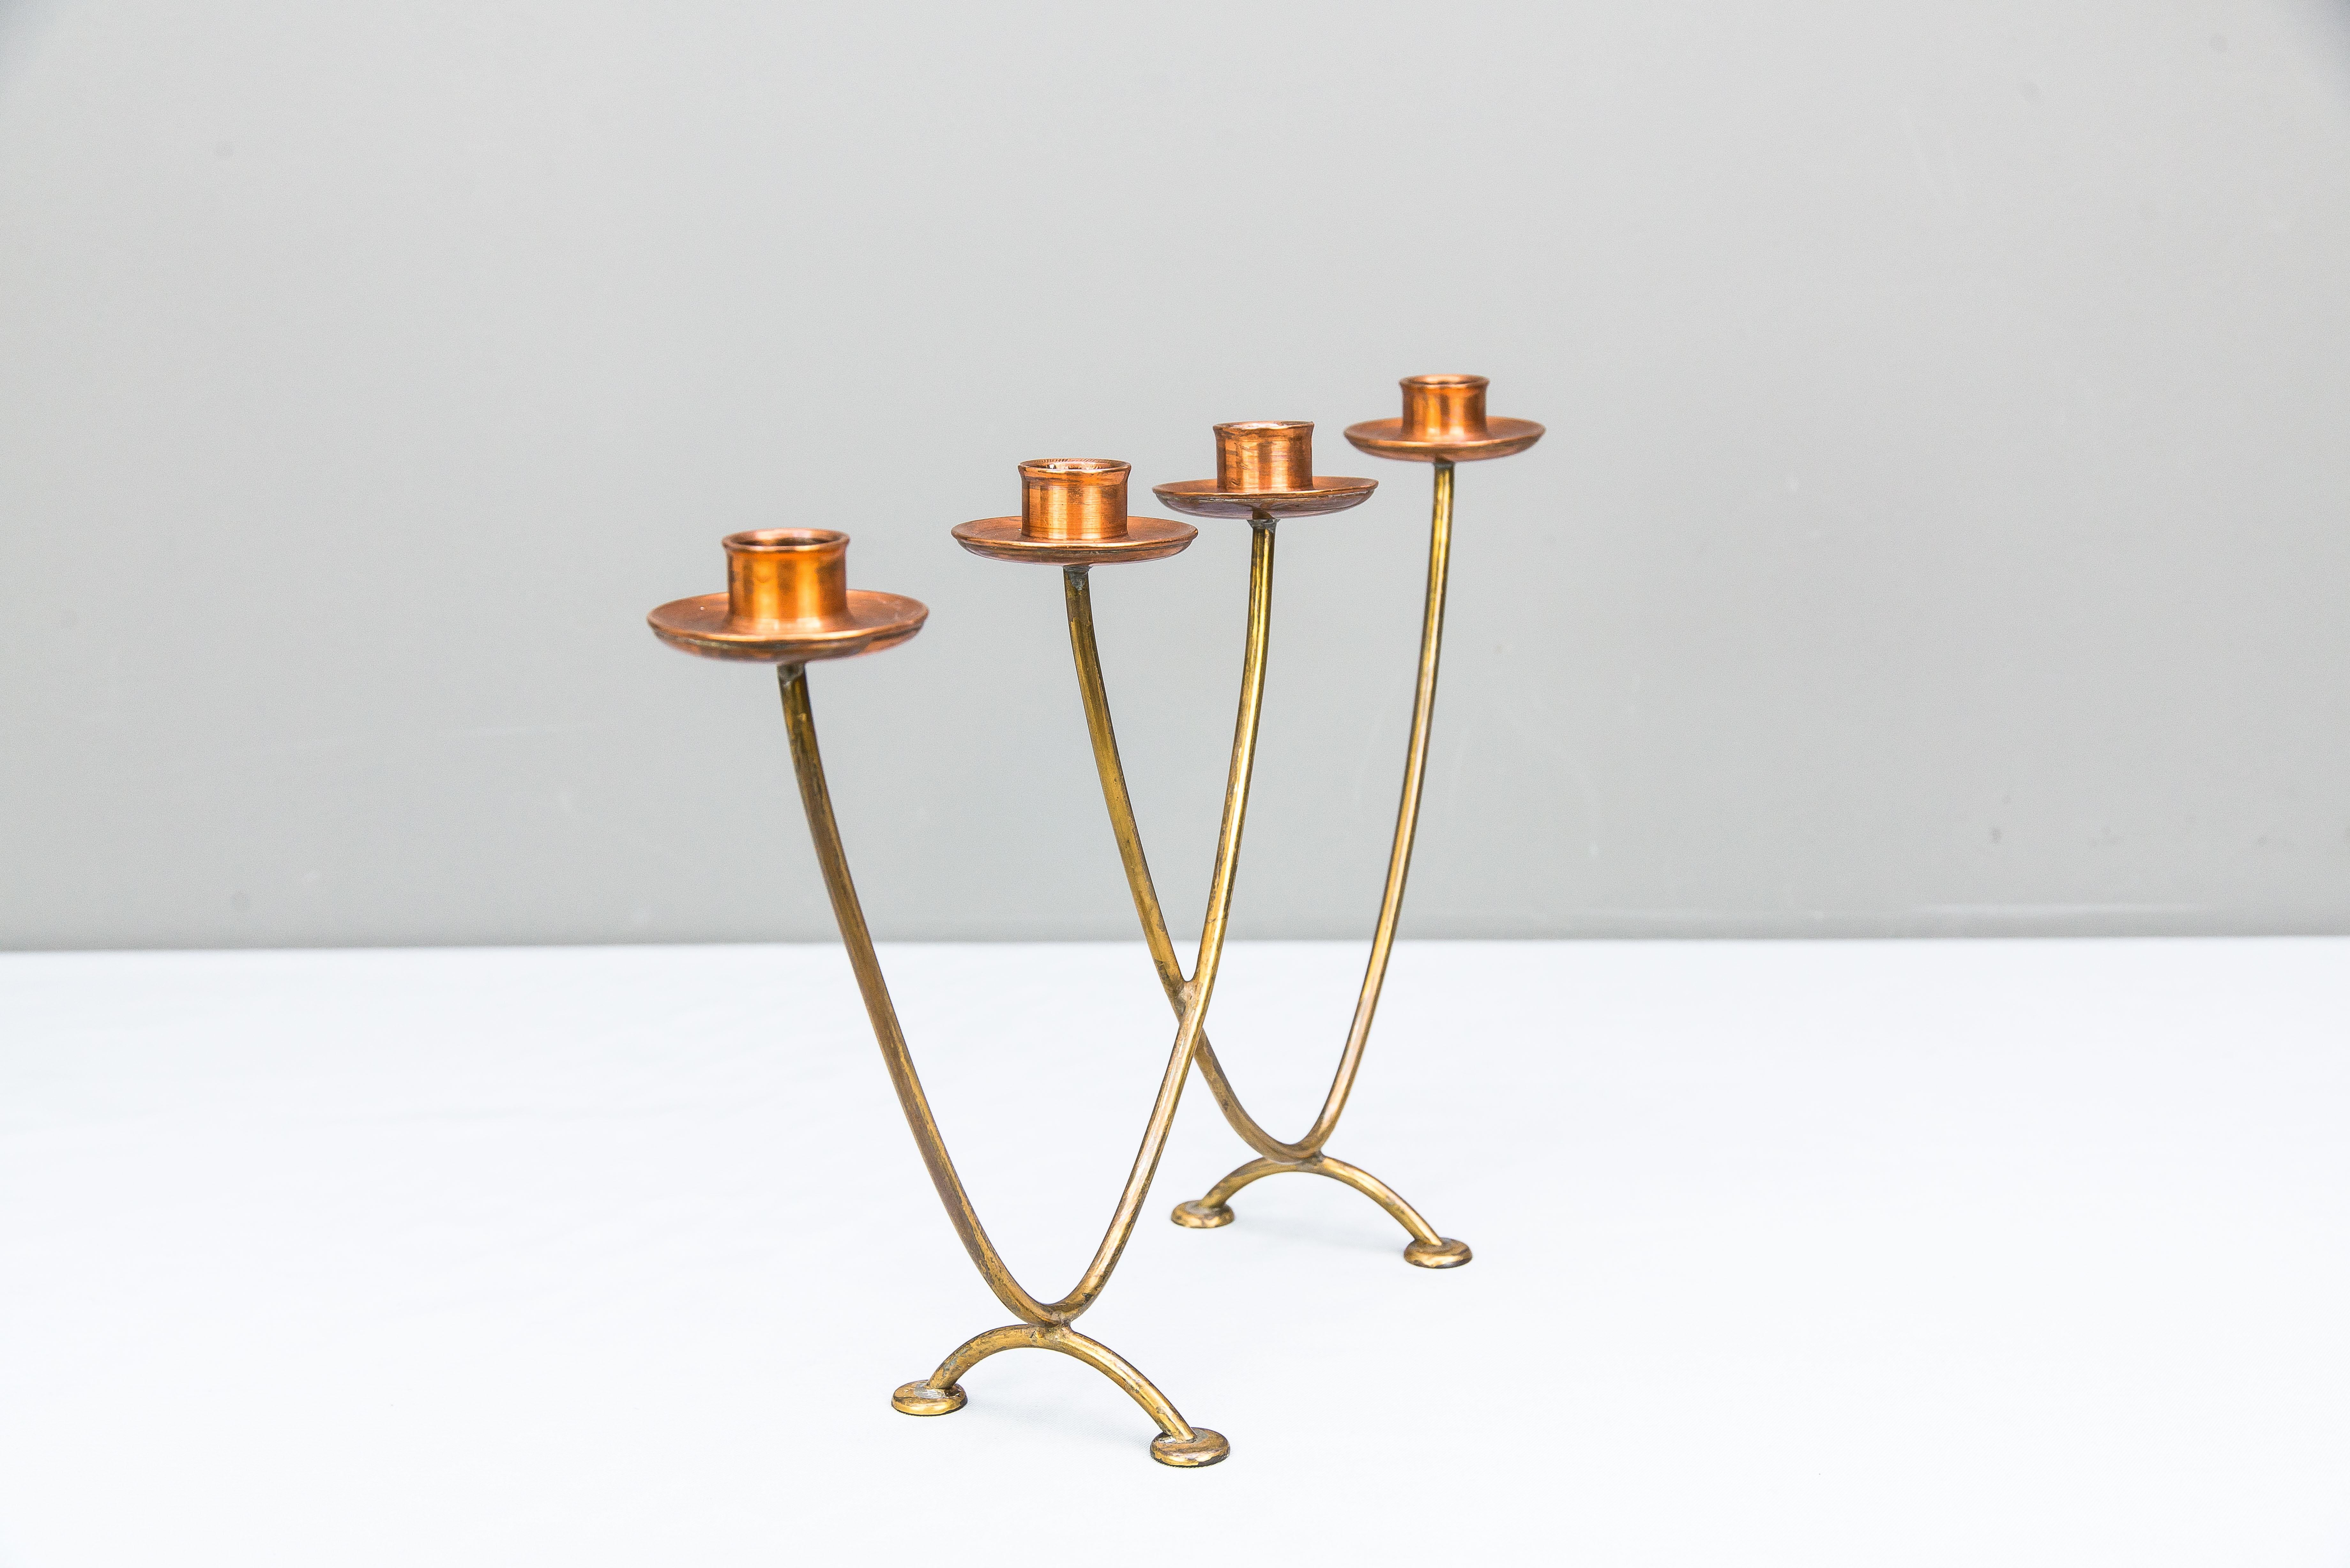 Candleholder for 4 Candles Execution in Copper and Brass, circa 1950s For Sale 4